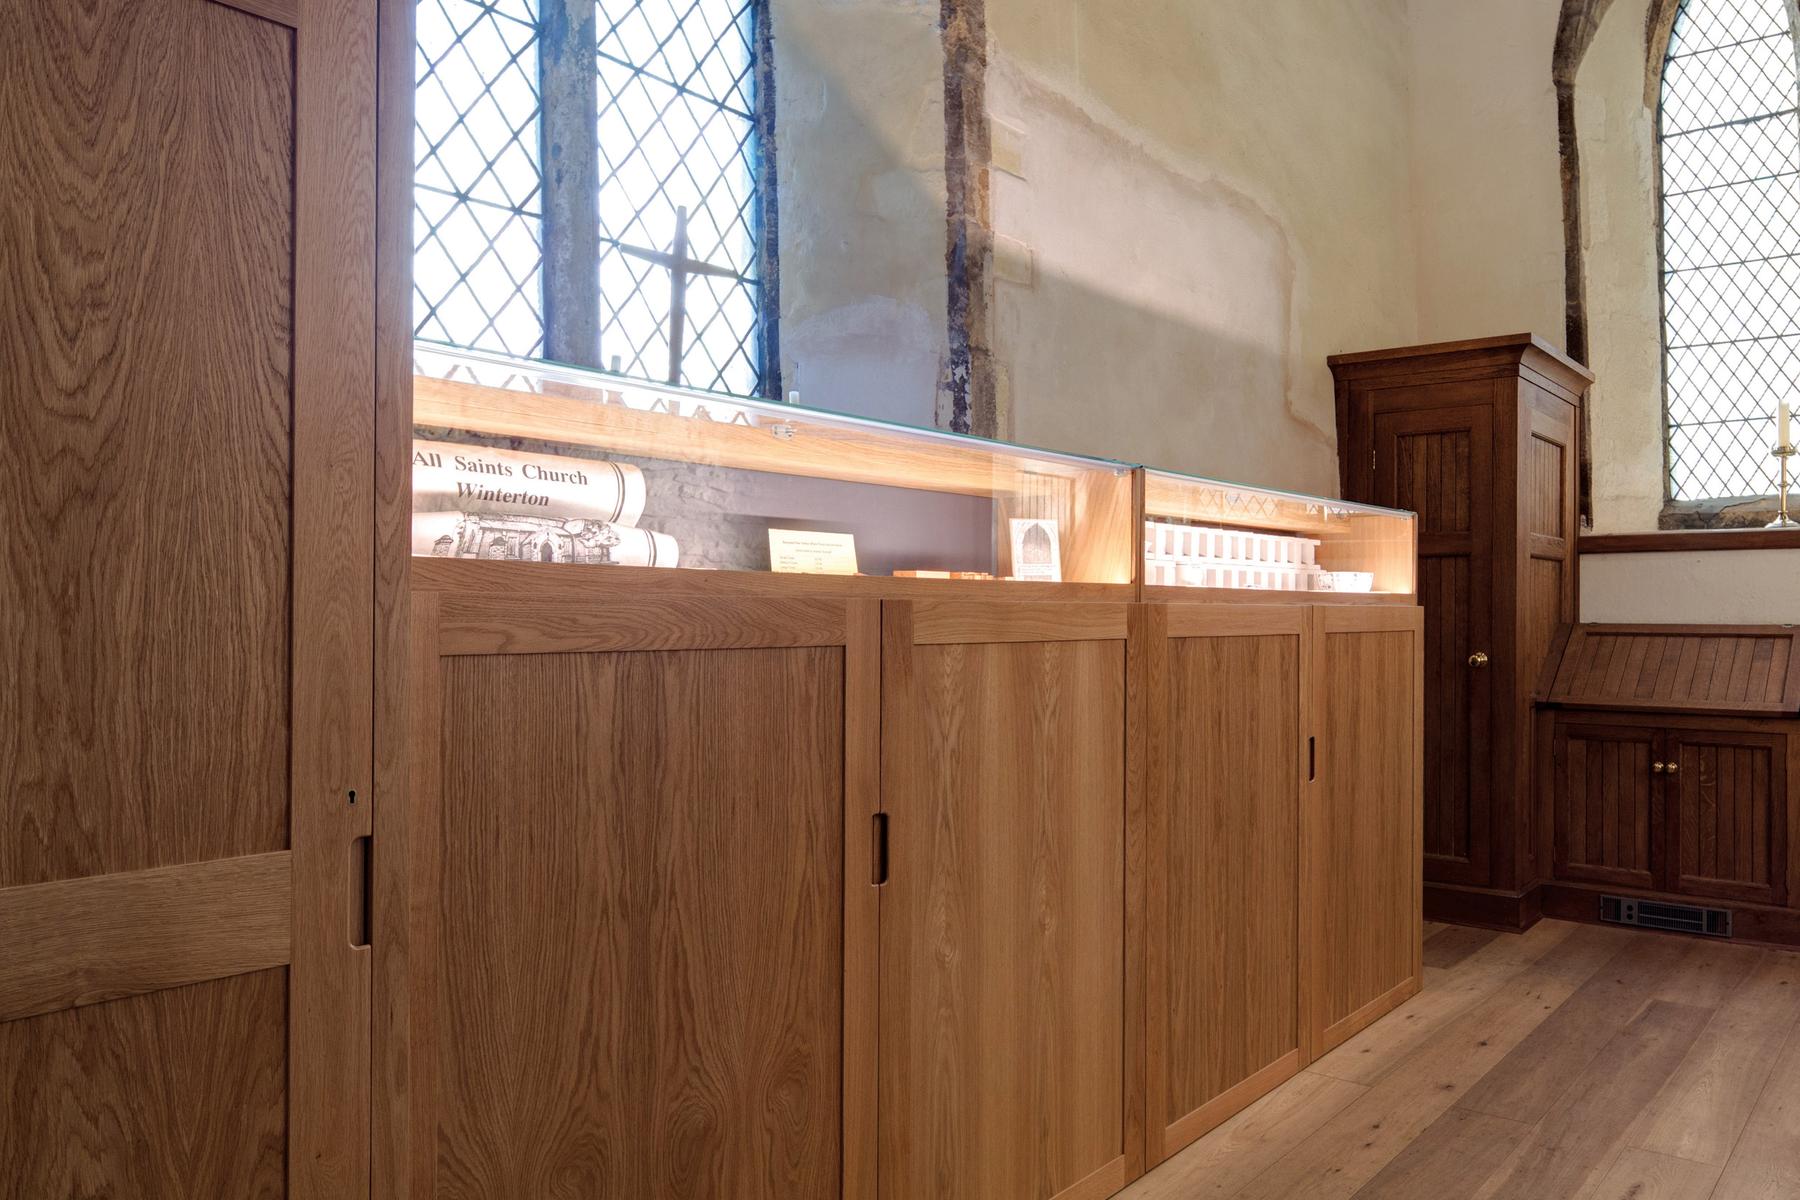 Display cases and storage All Saints, Winterton